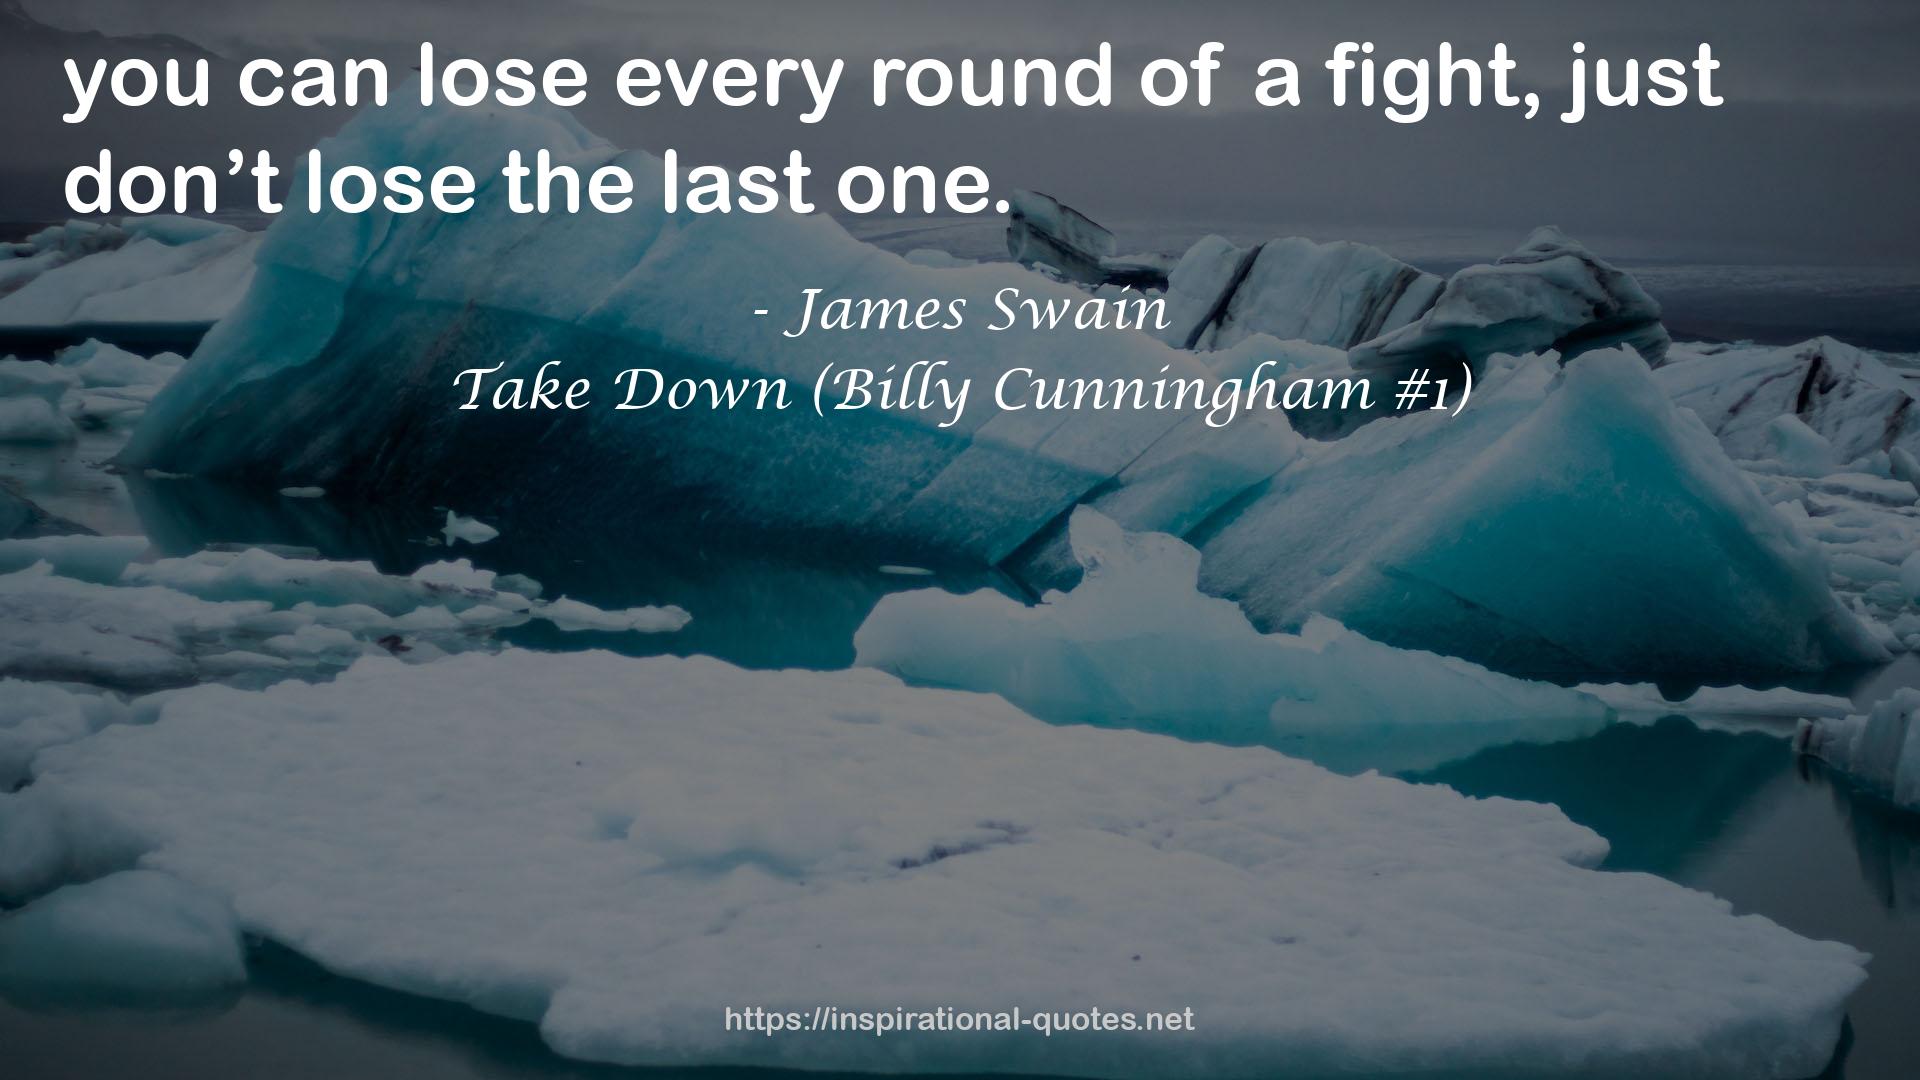 Take Down (Billy Cunningham #1) QUOTES